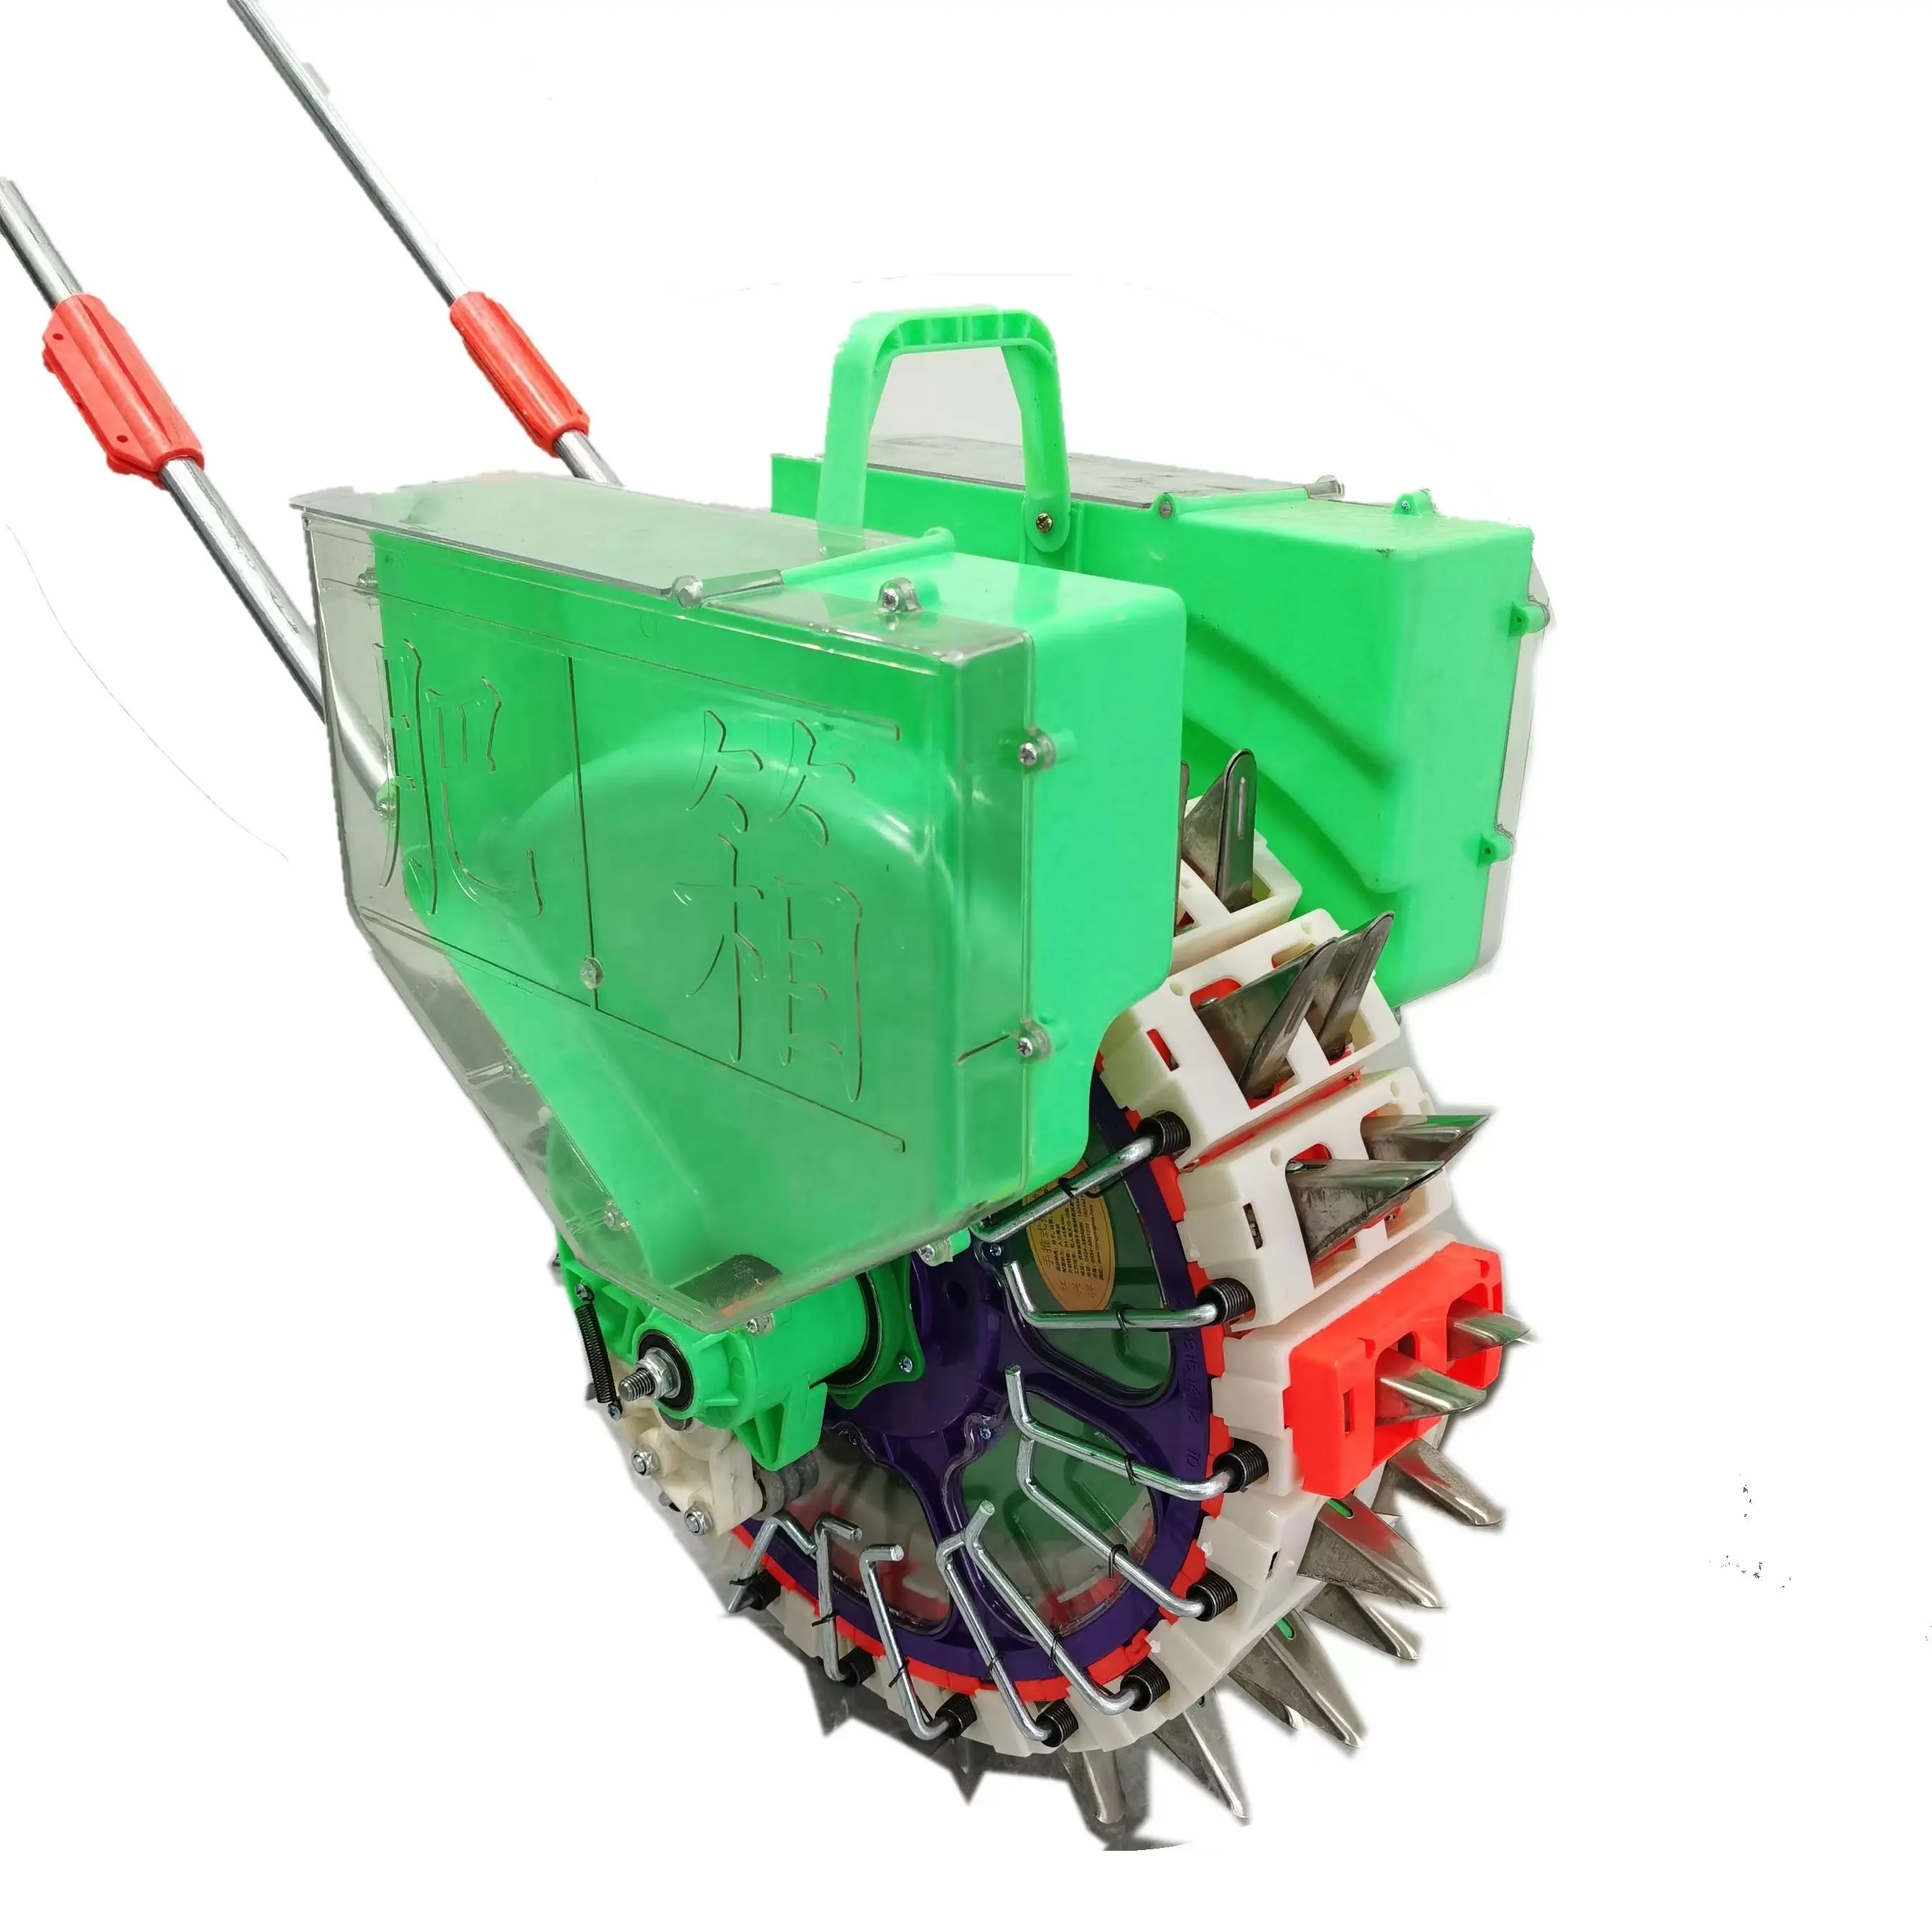 Drum Seeder 40mouths Groundnut planting machine Simple Portable Hand Seed Planter with Fertilizer